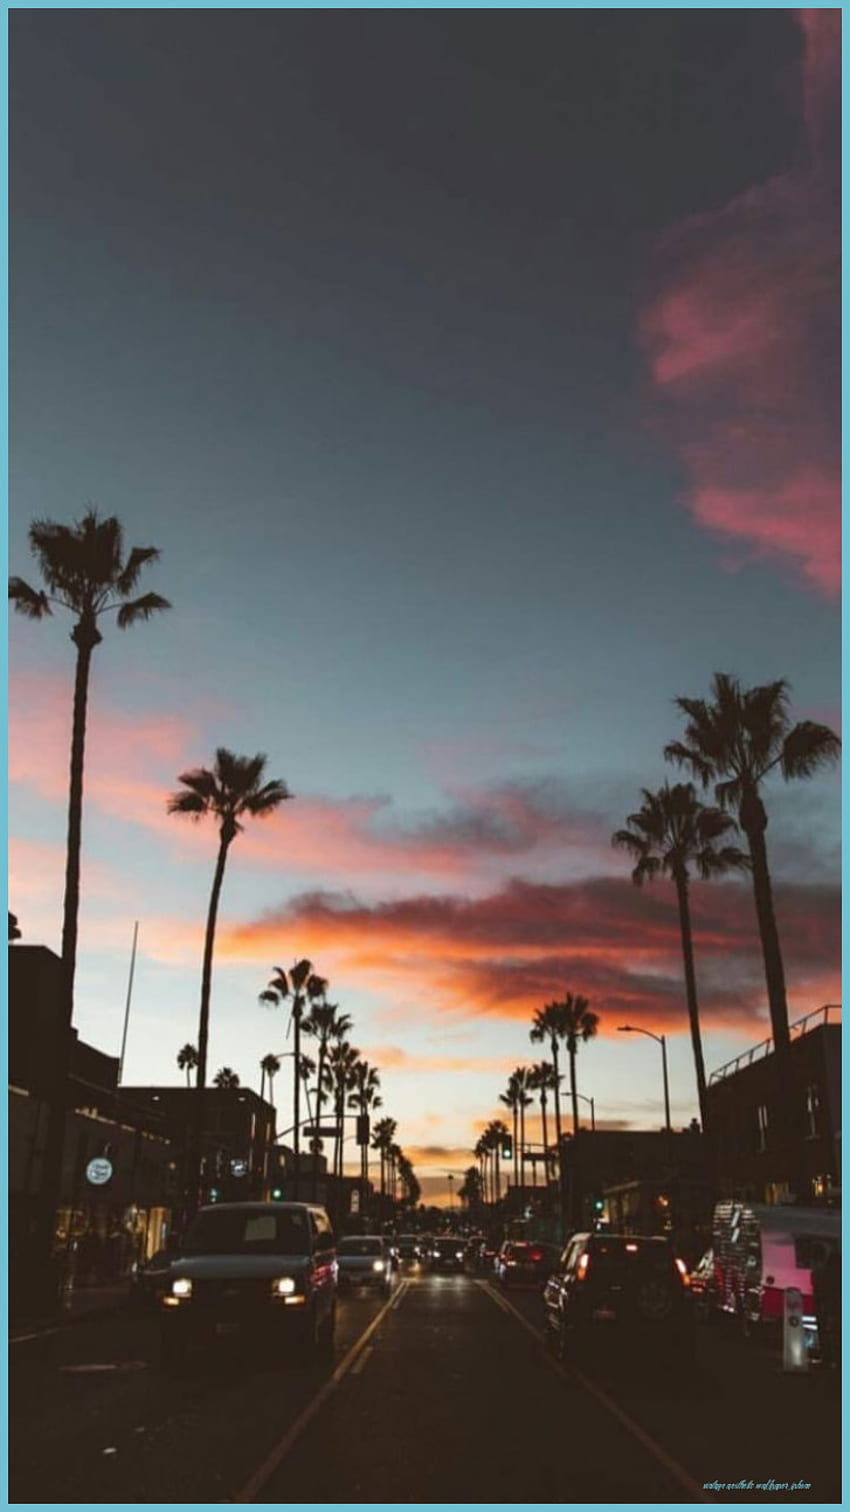 A sunset view of a street lined with palm trees. - IPhone, vintage